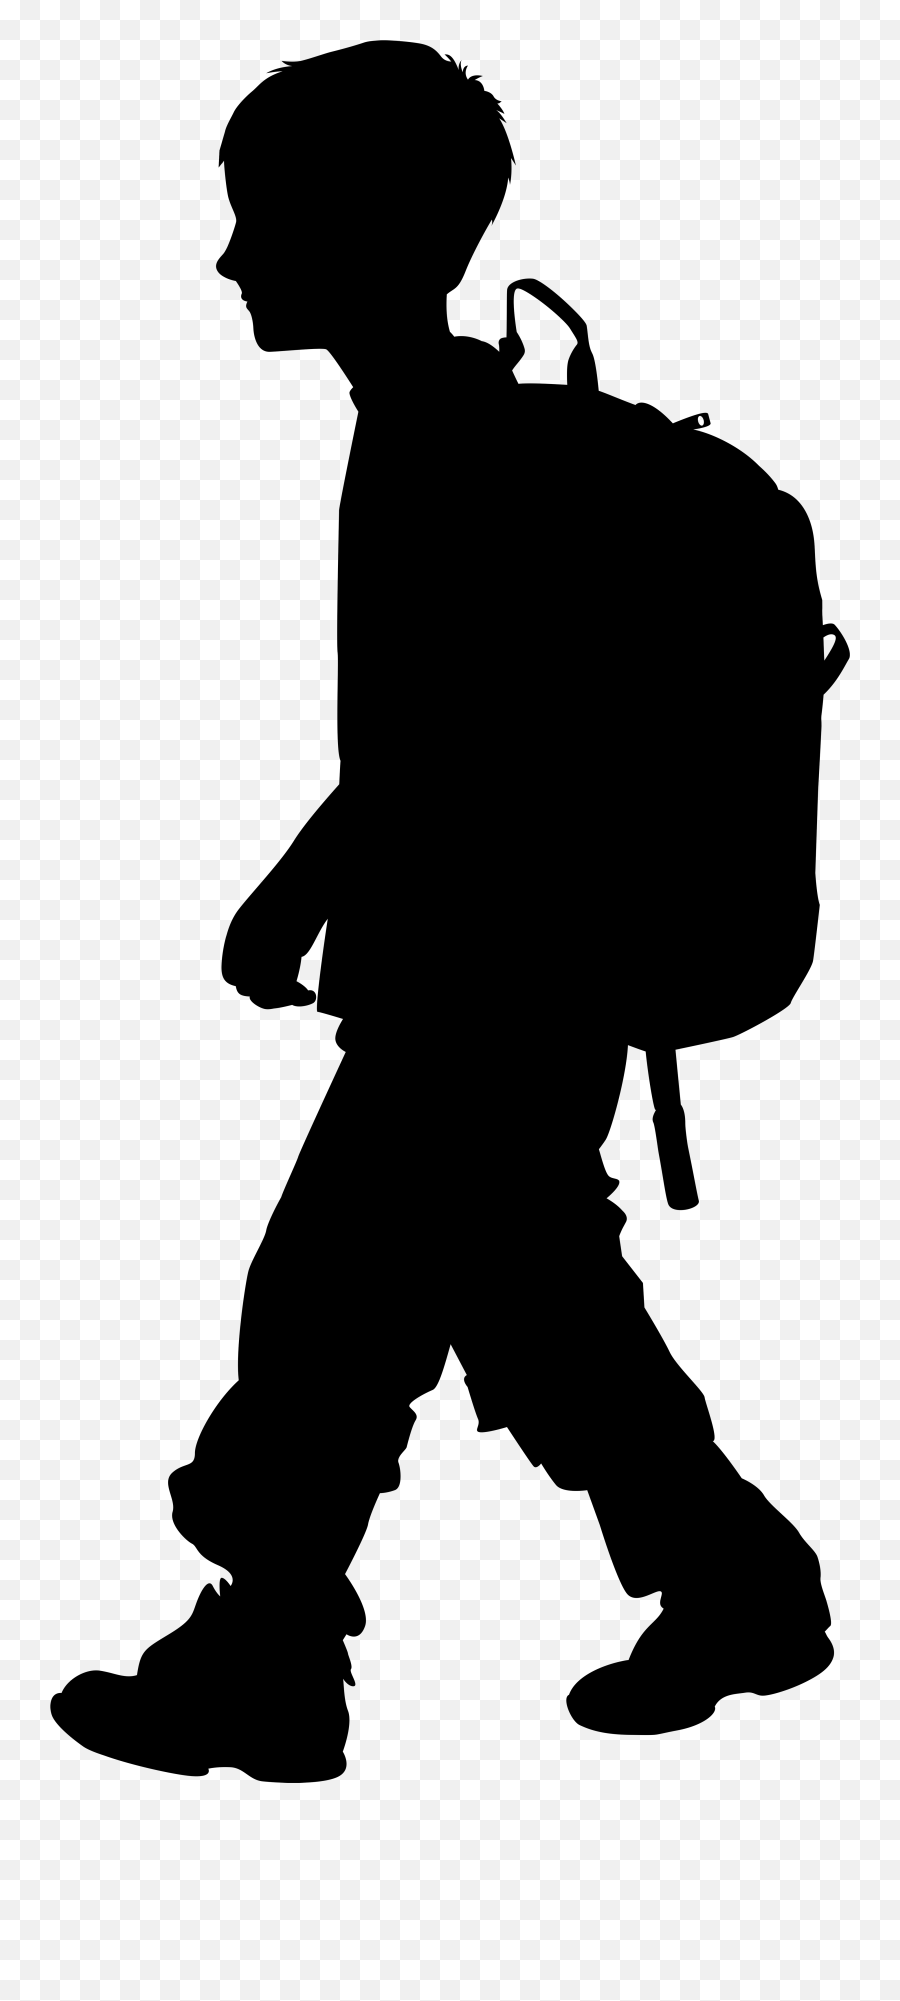 The Best Free Backpack Silhouette Images - Boy Silhouette Png Emoji,Emoji Backpack For Boys